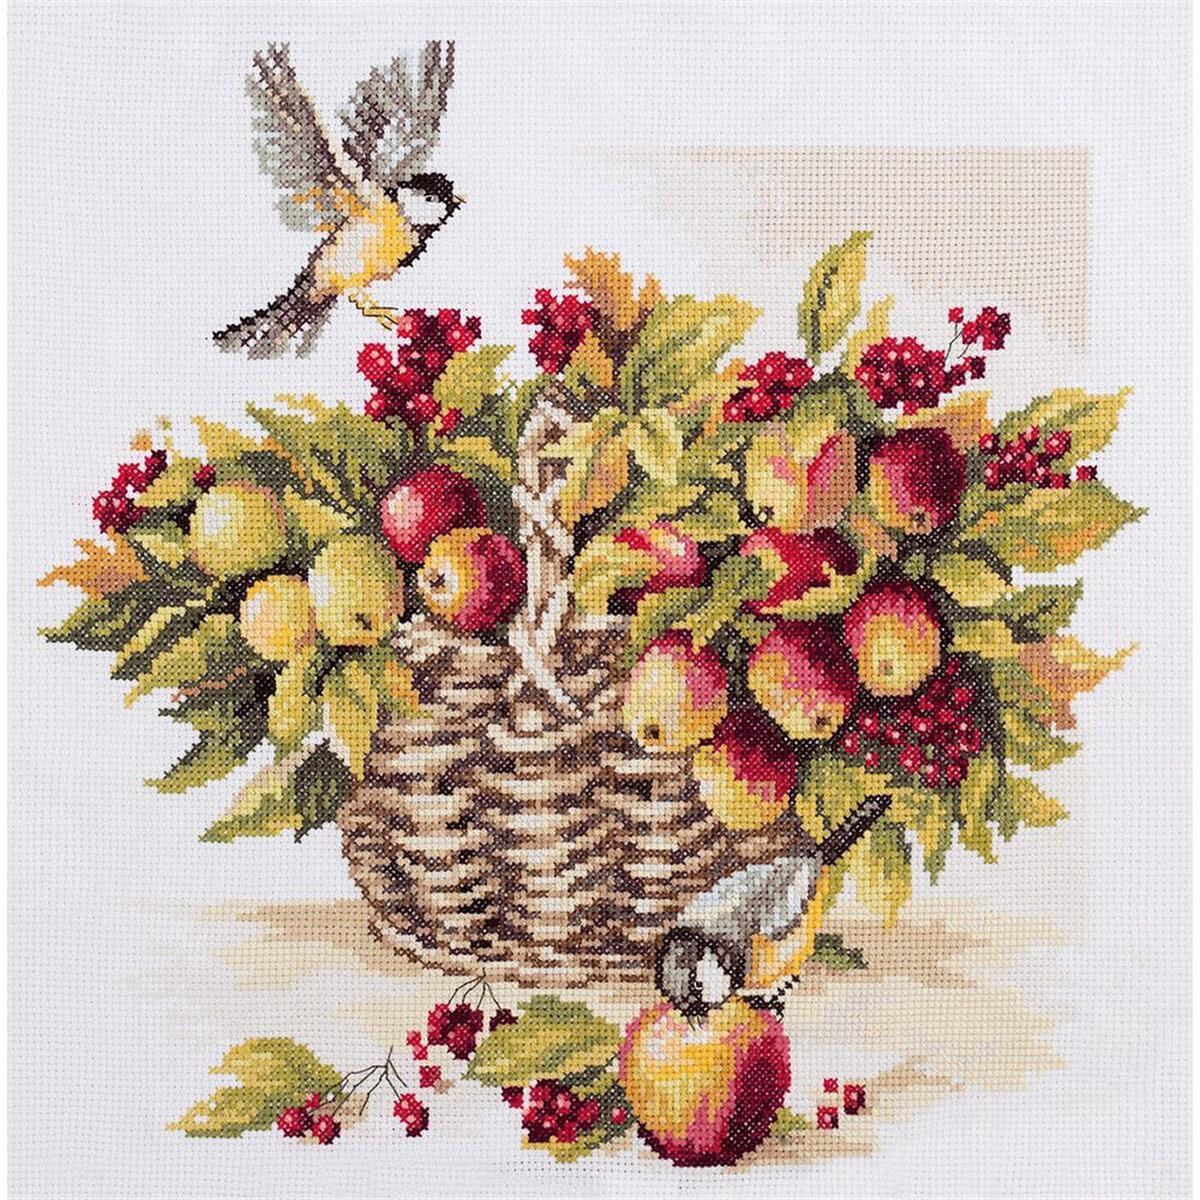 Panna counted cross stitch kit "Generous August...